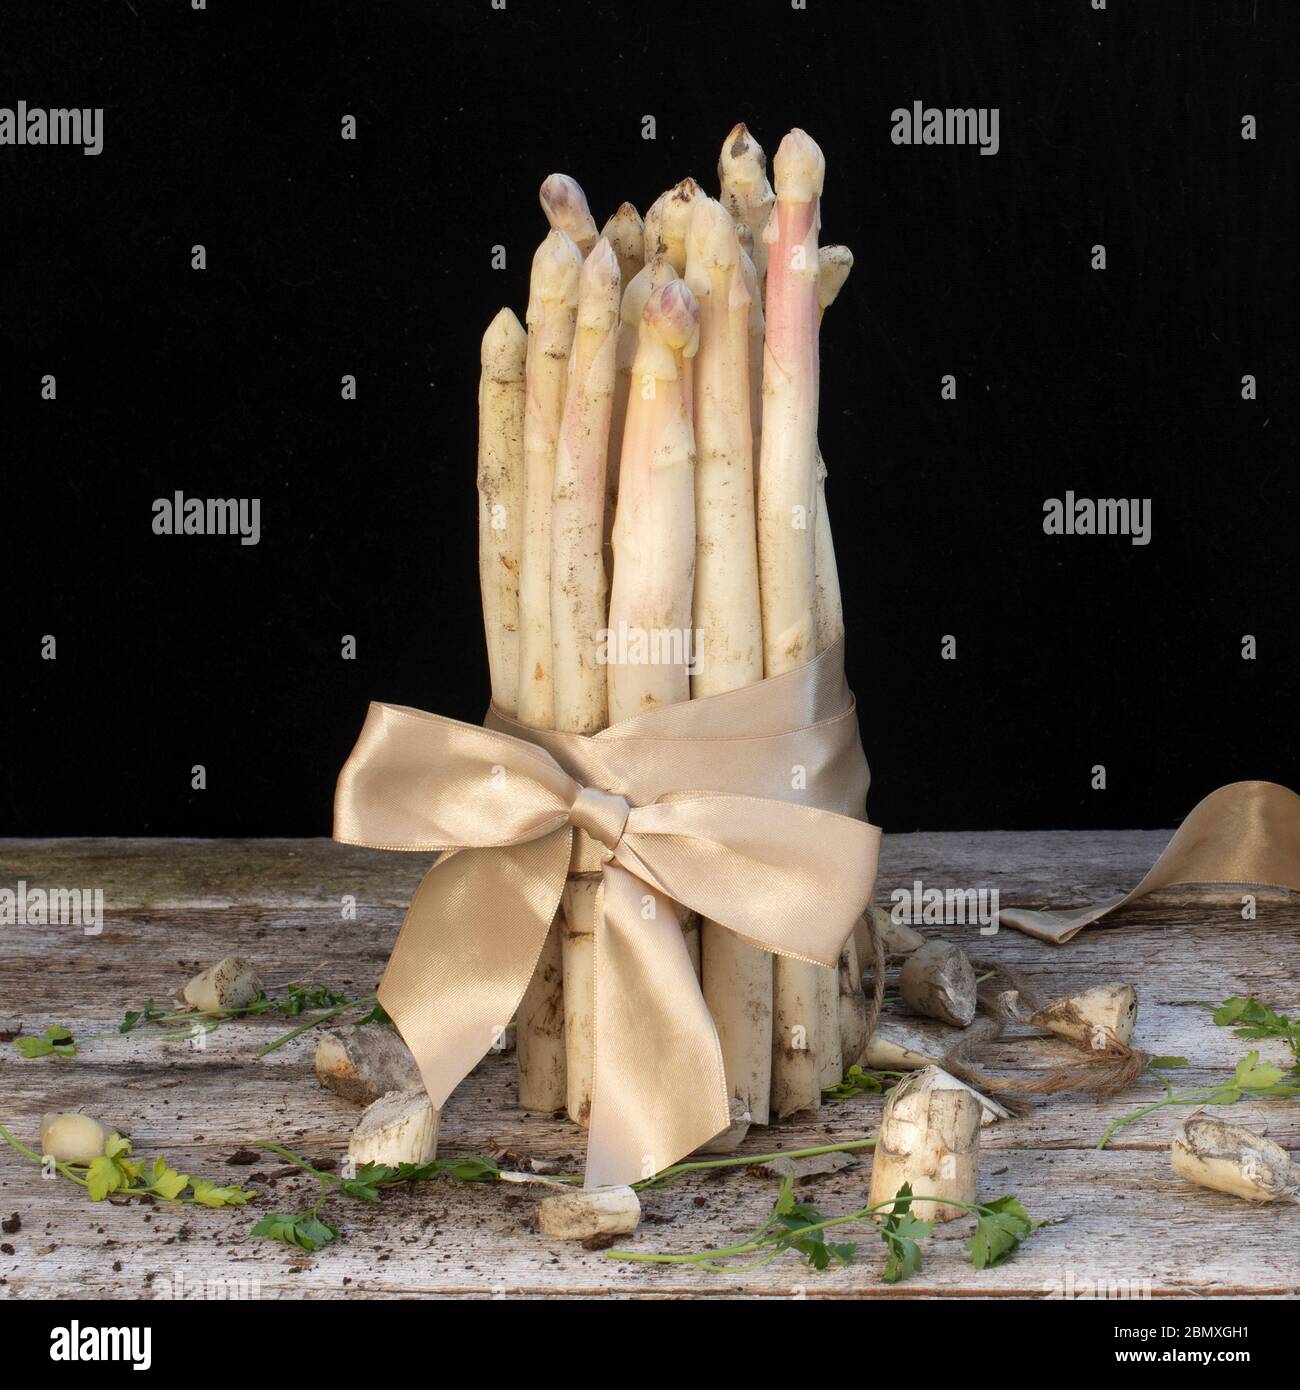 white asparagus side view on wooden table with black background Stock Photo